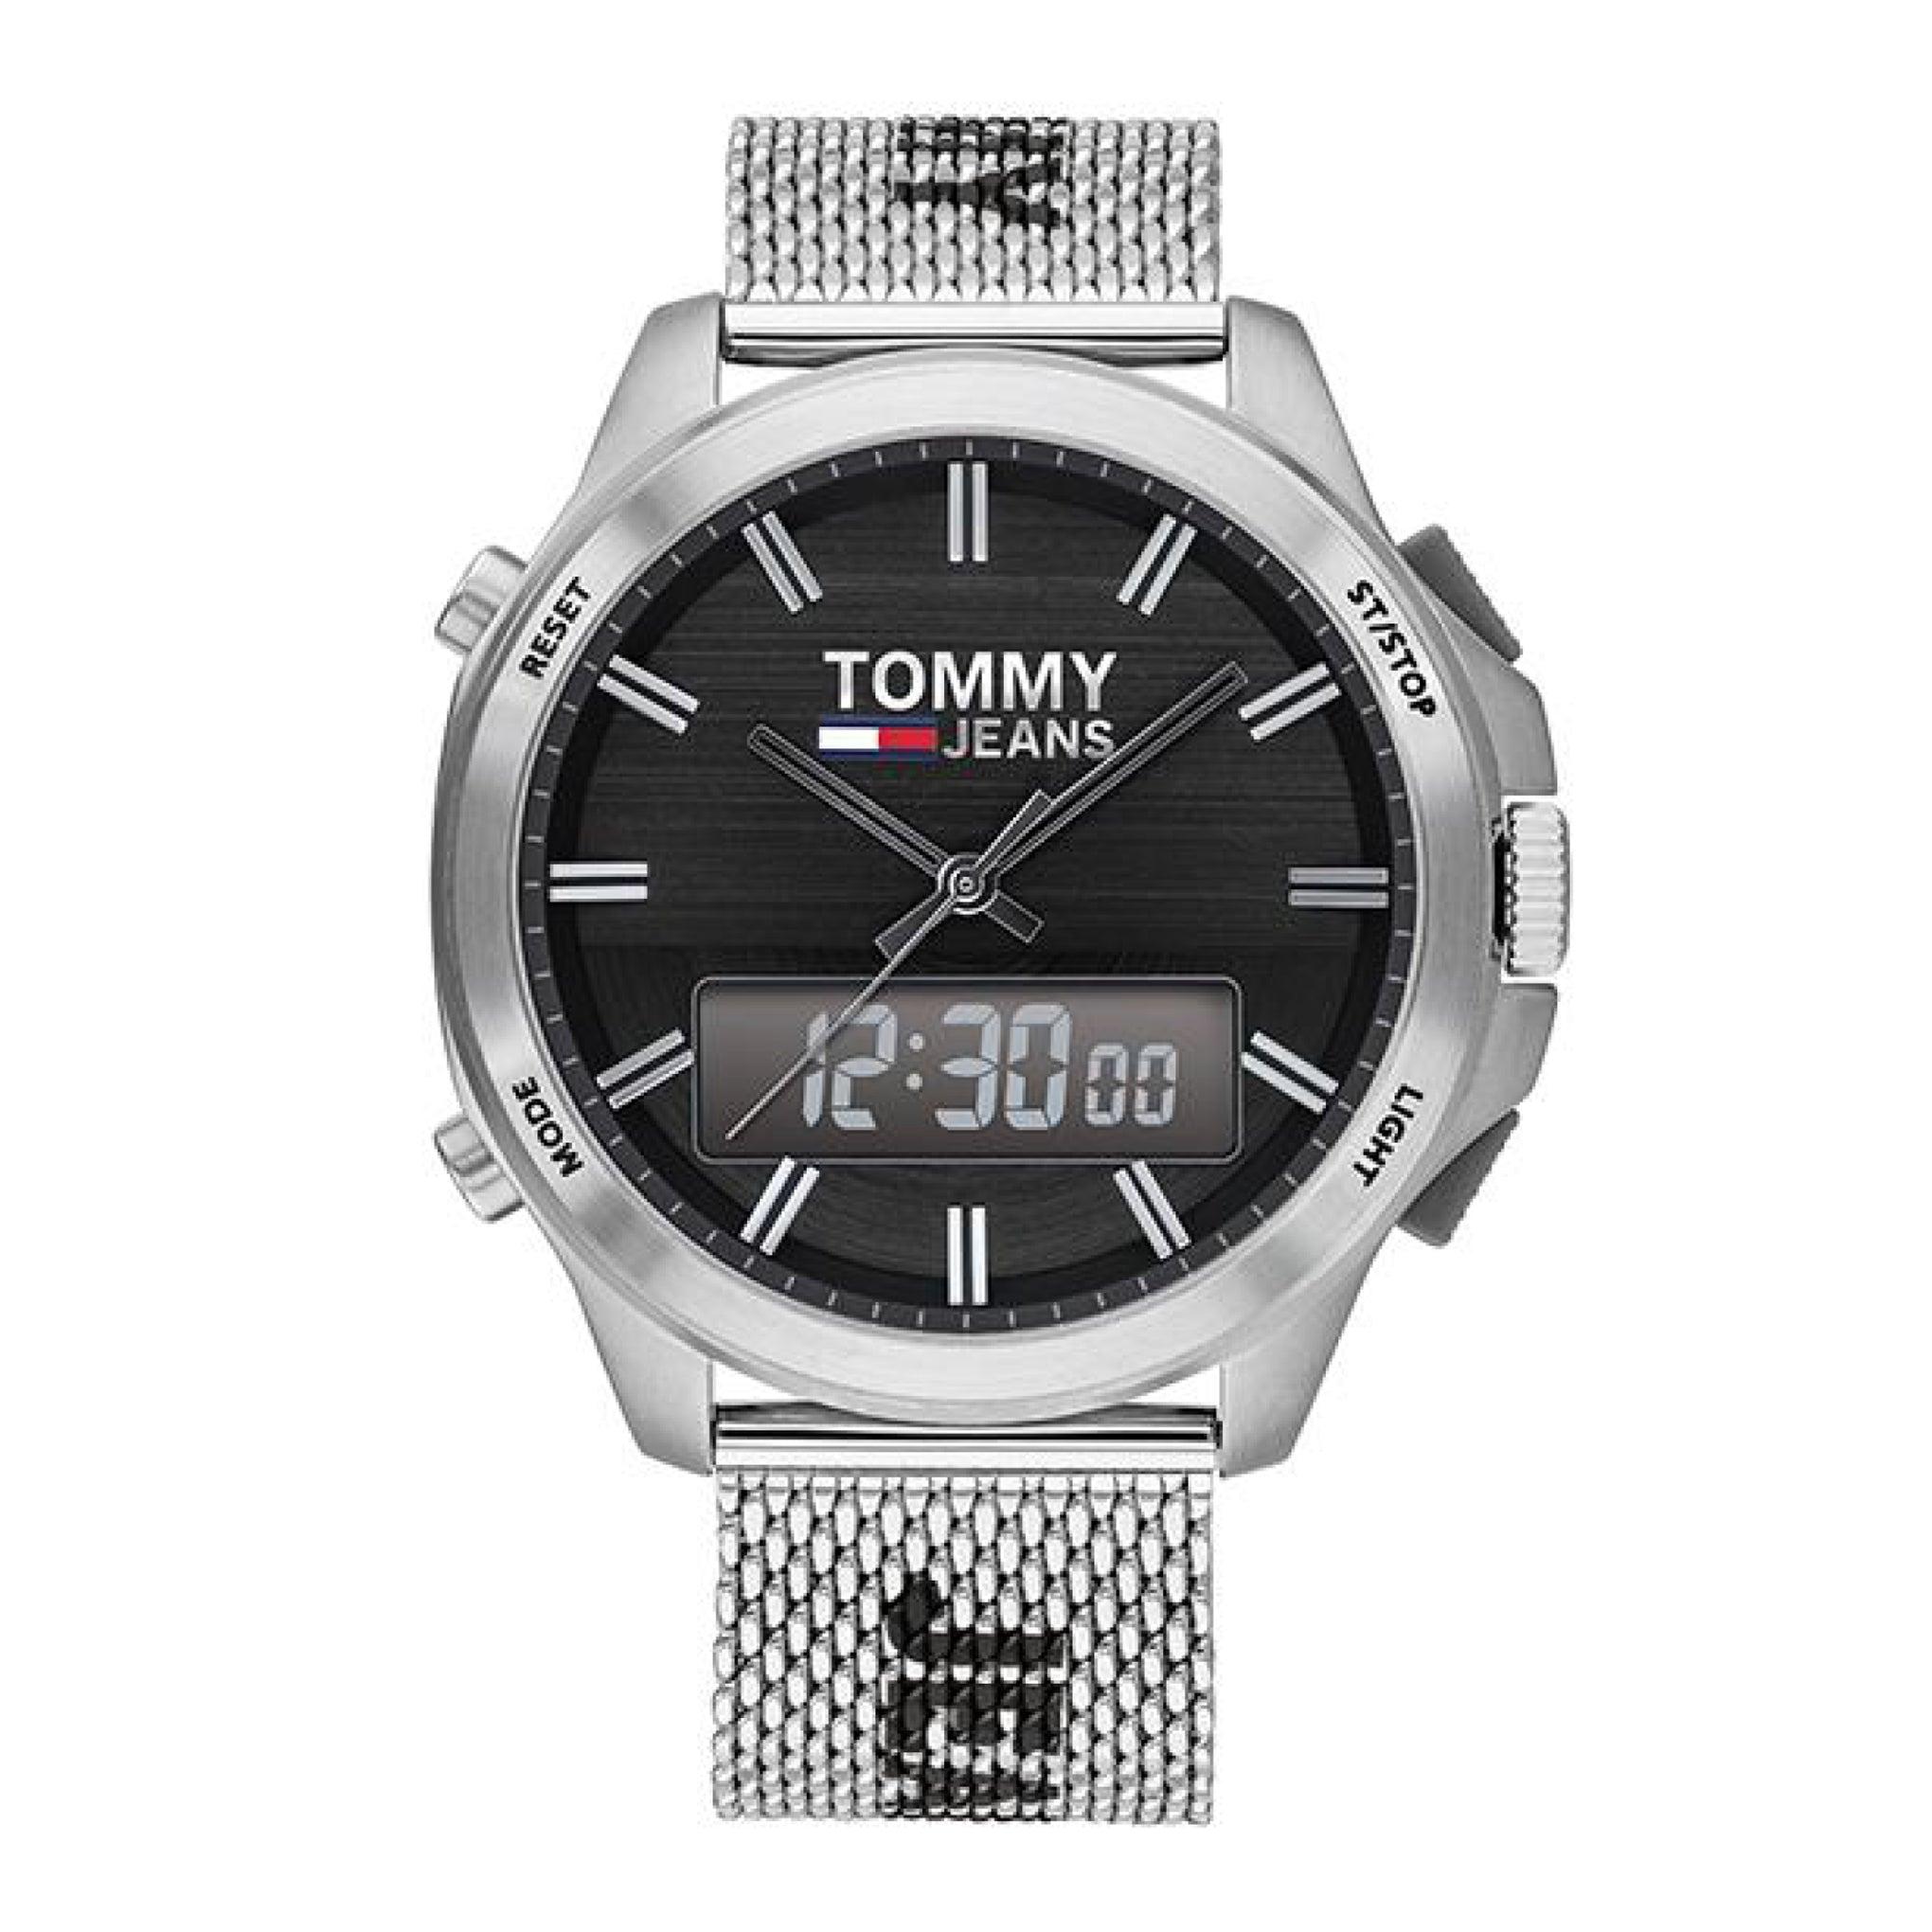 Tommy Hilfiger Tommy Jeans Men's Black Dial Stainless Steel Watch 1791765